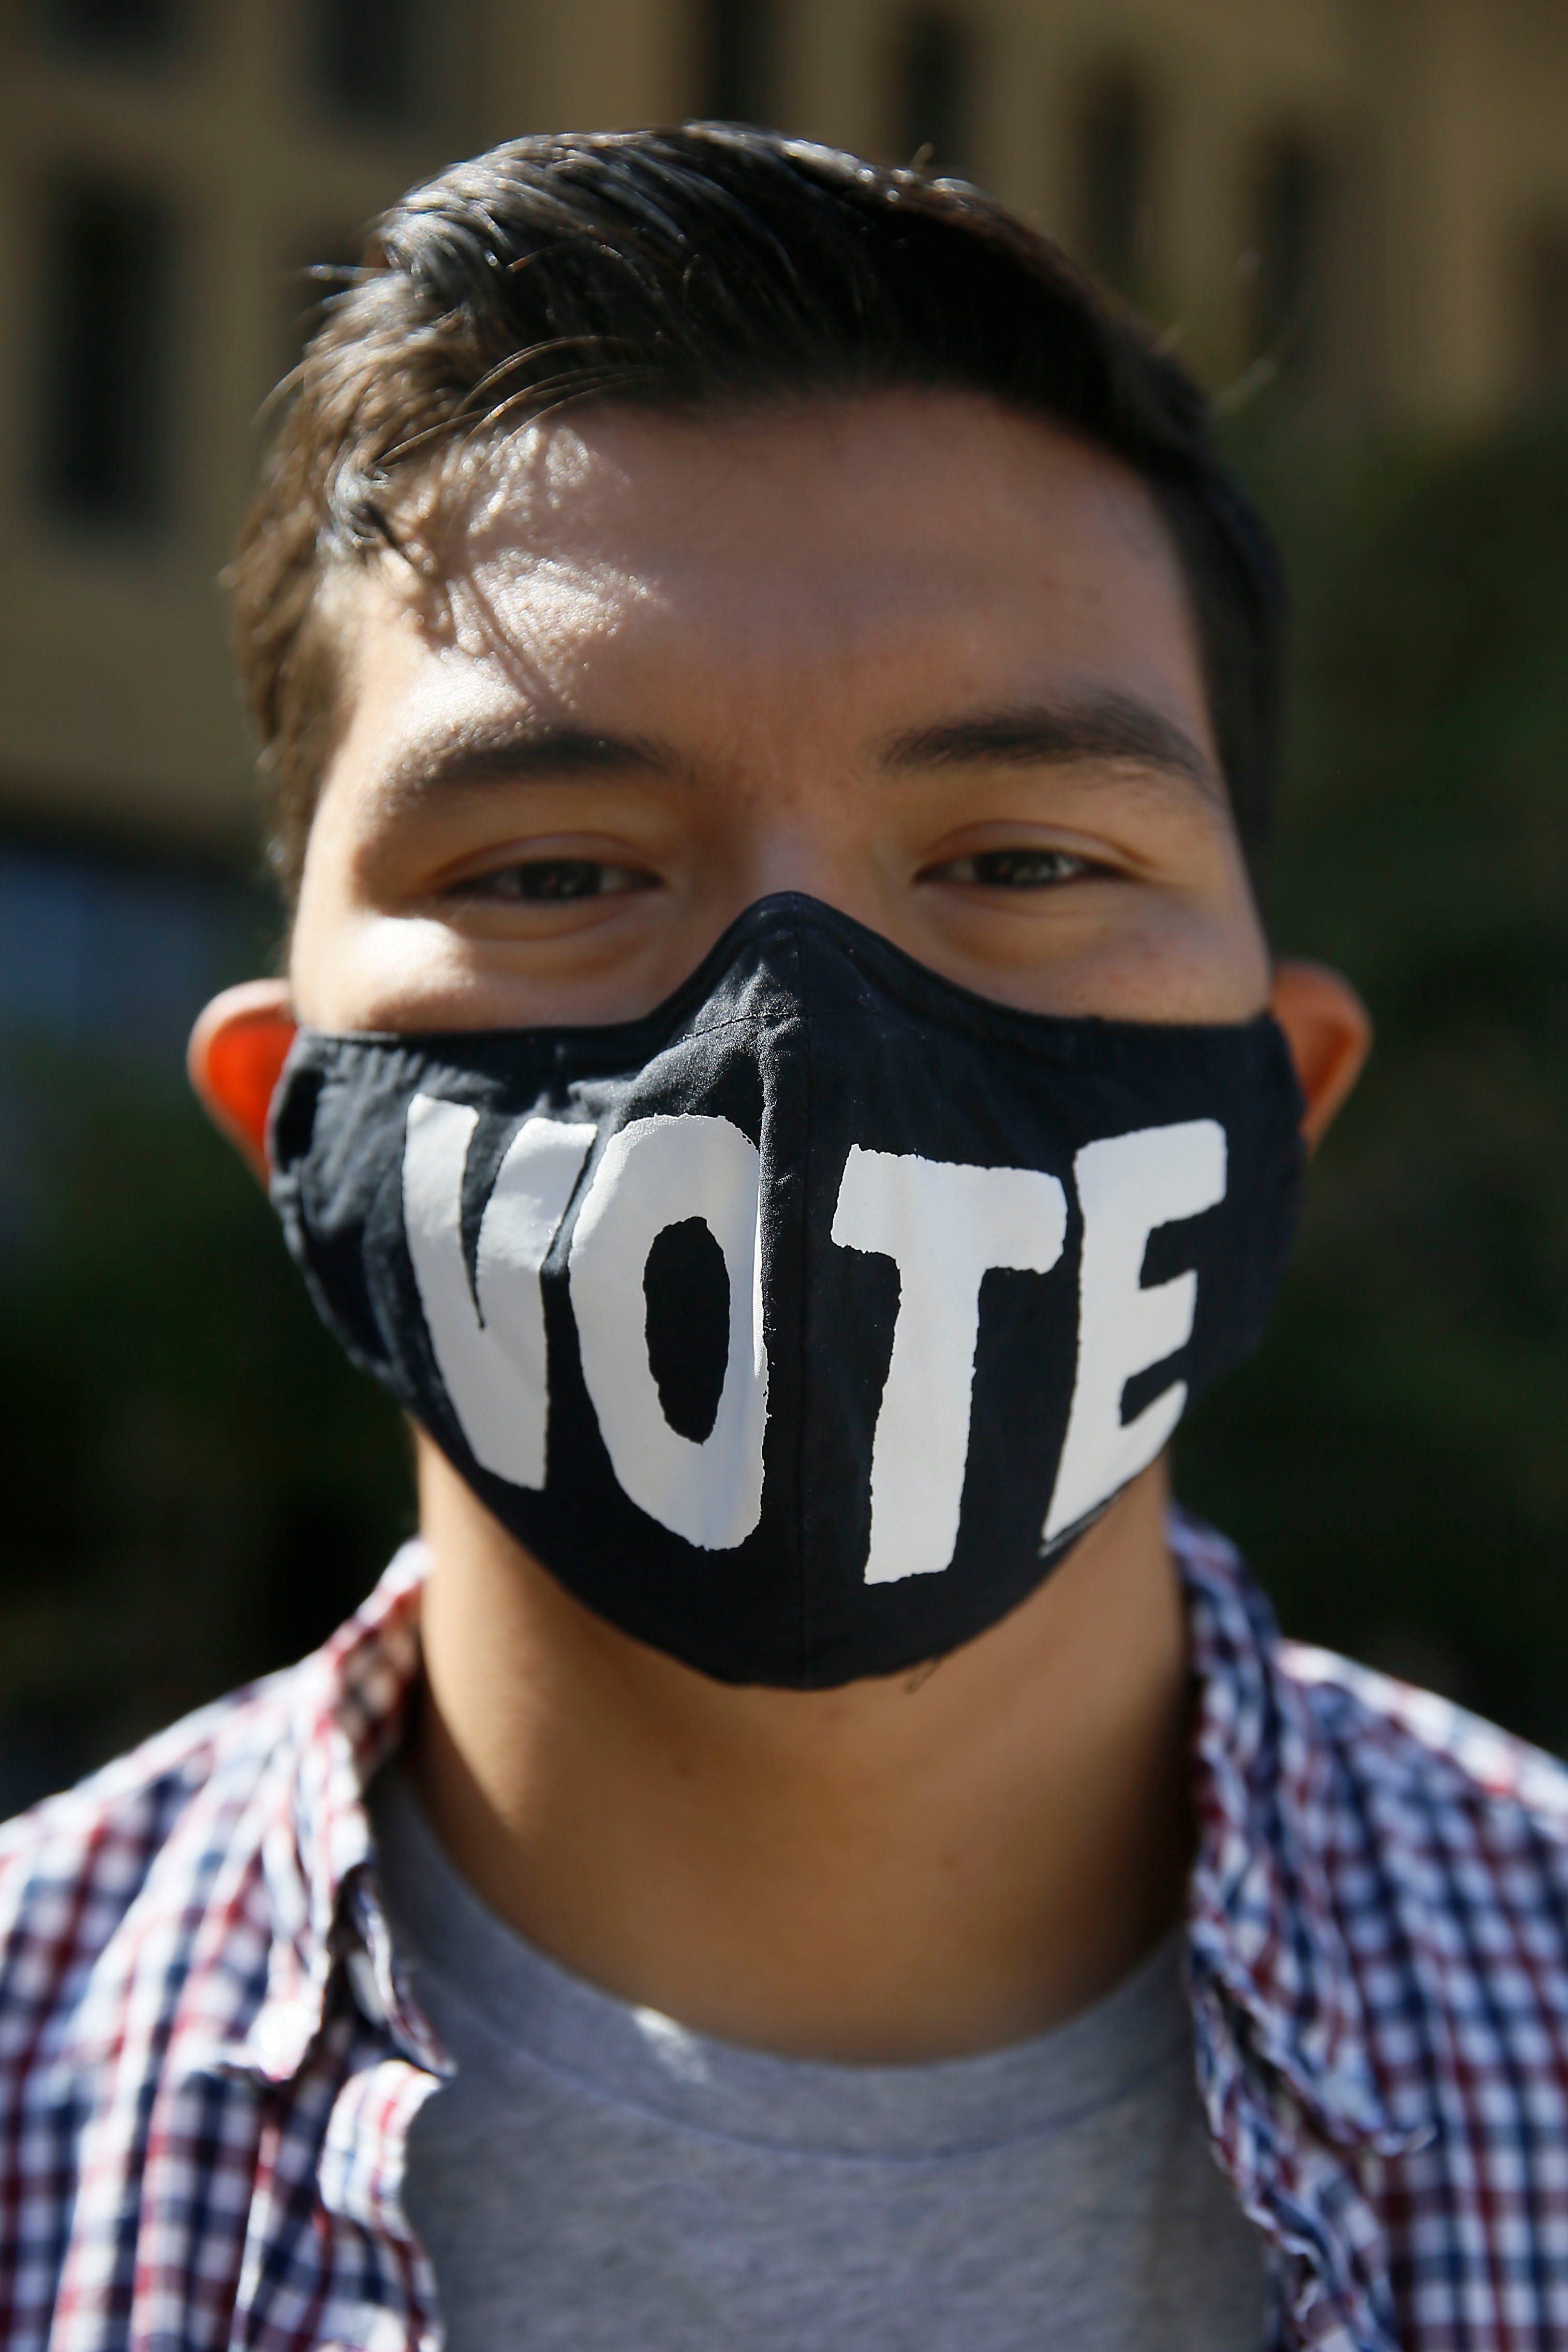 Student wears a mask that reads